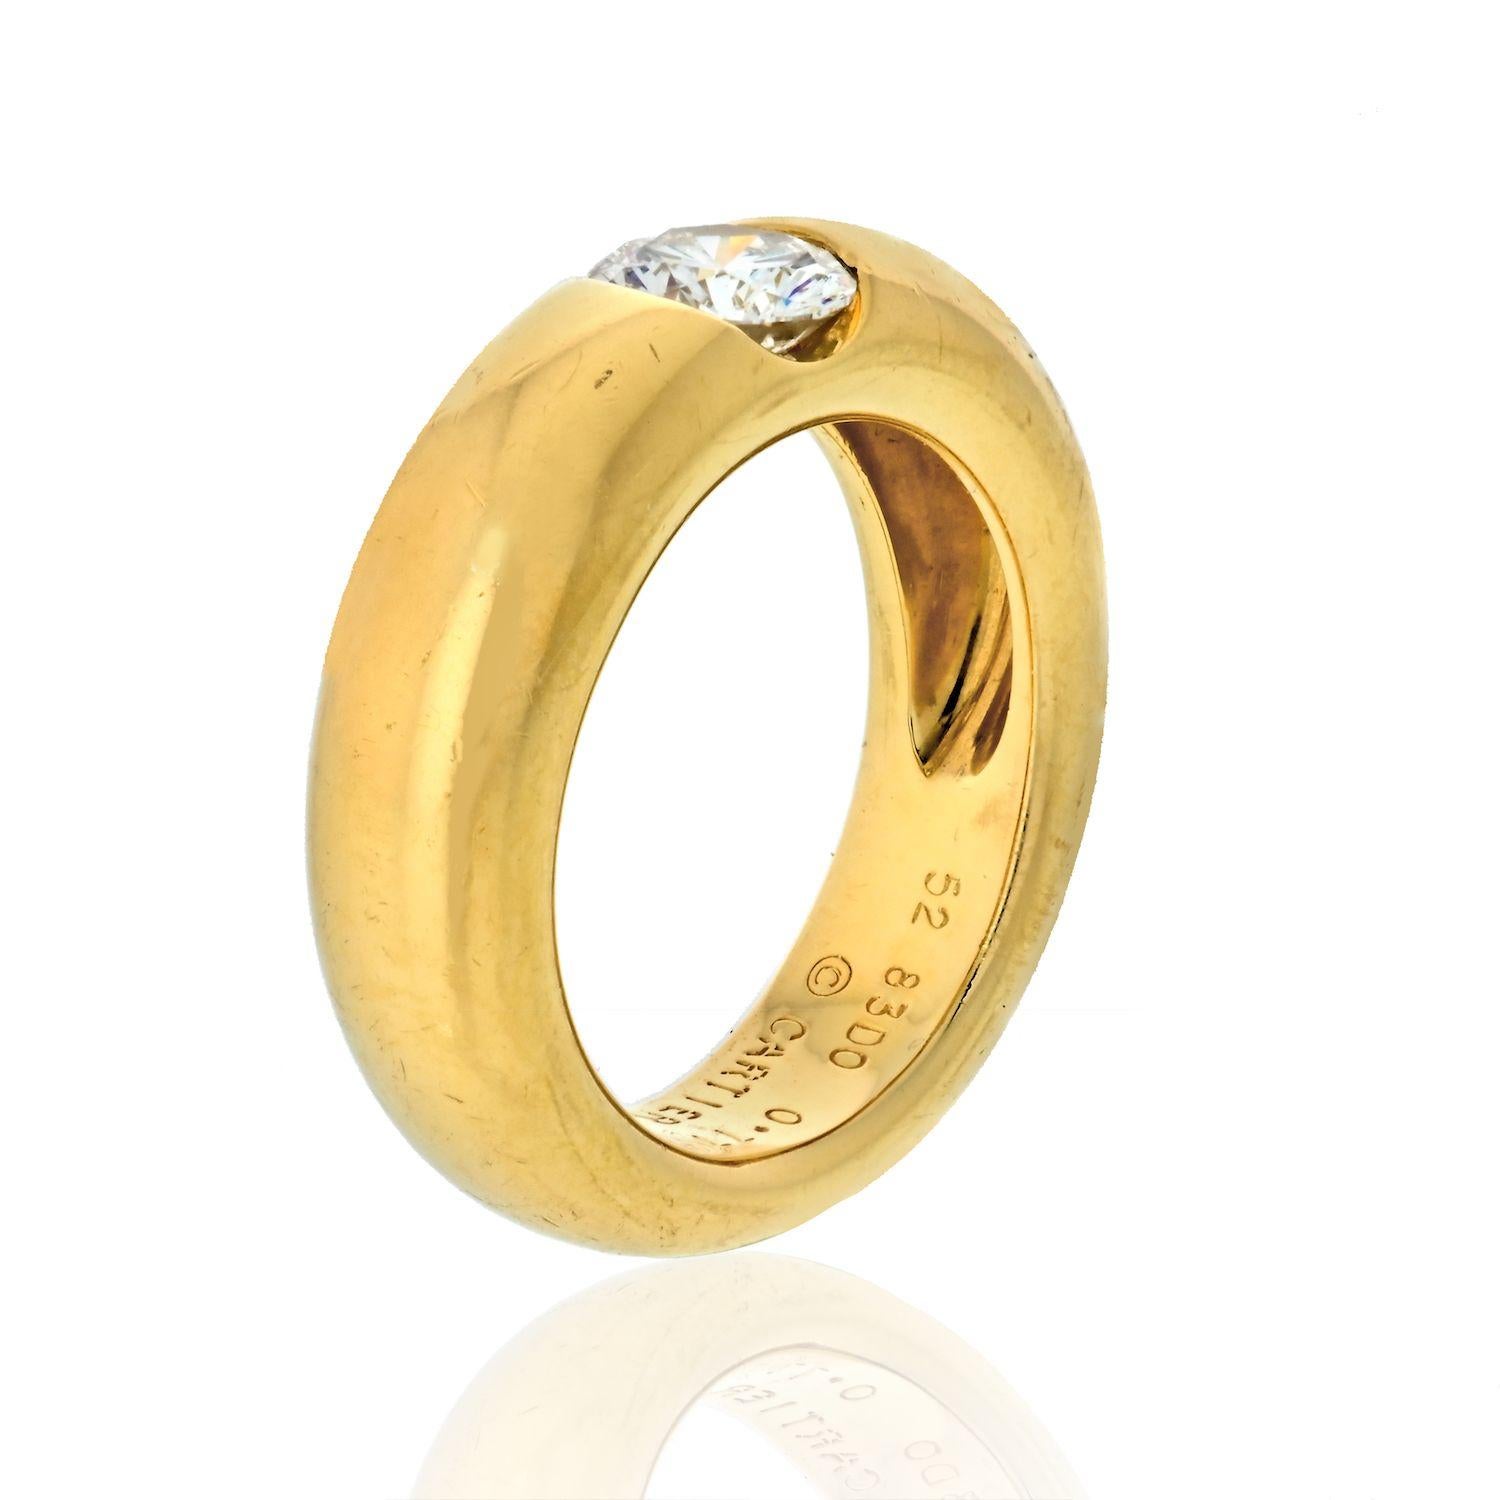 Cartier yellow gold diamond engagement ring crafted in 18K gold set with round brilliant cut diamond.

Crafted in 18K gold; set with a round brilliant-cut diamond, weighing 0.77 carat (diamond weight is engraved), with E-F color and VVS clarity;